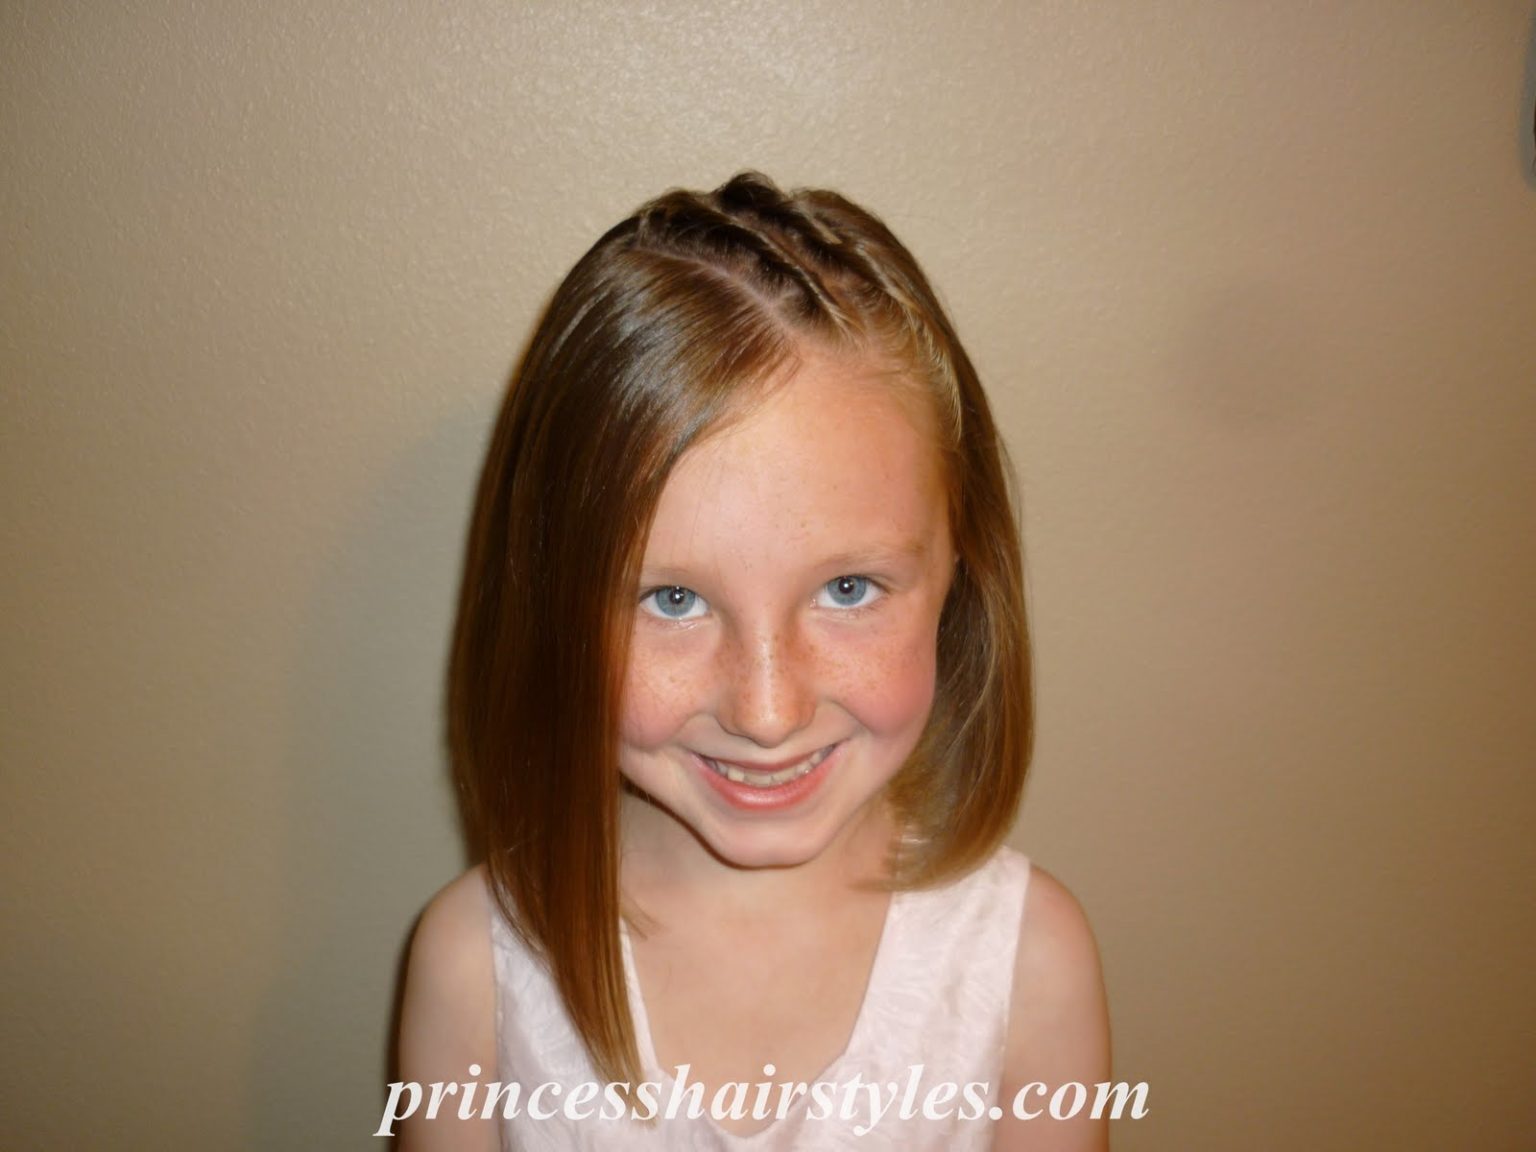 All You Need To Know About Tween Girl Hairstyles Tween Girl Hairstyles The World Tree Top 